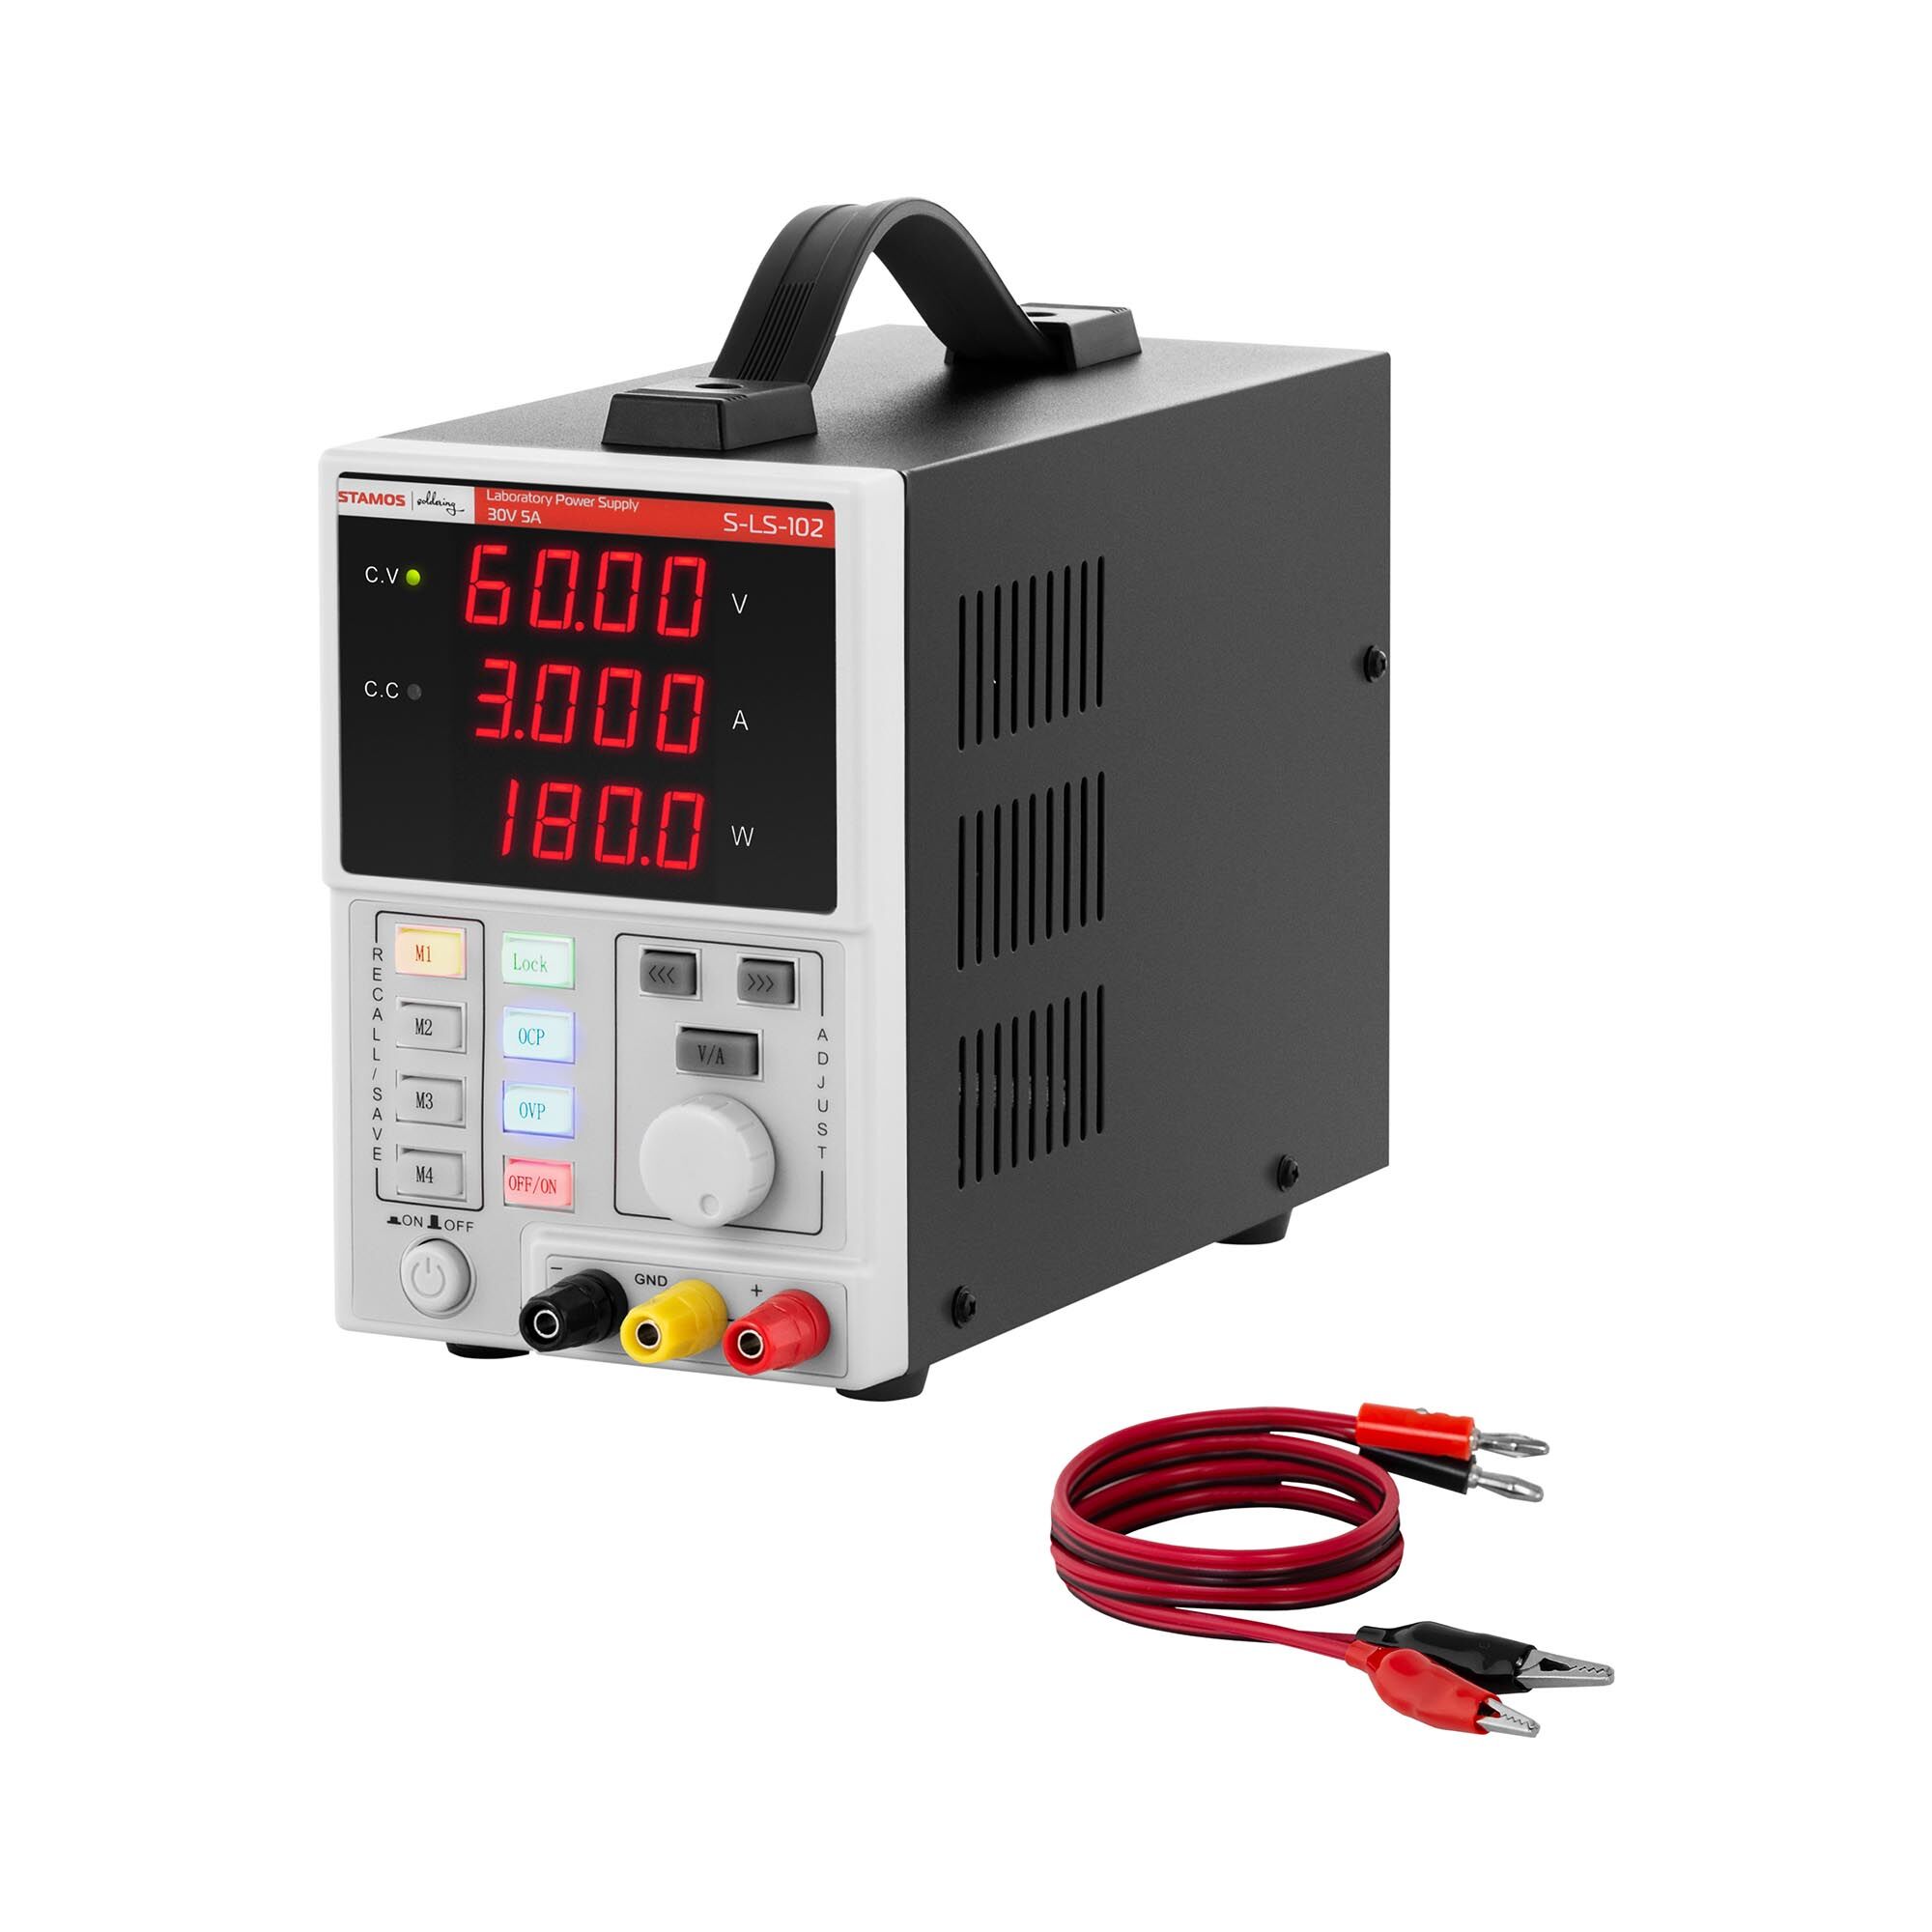 Stamos Soldering Bench Power Supply - 0 - 60 V - 0 - 3 A DC - 180 W - 4 memory spaces - 4-digit LED display